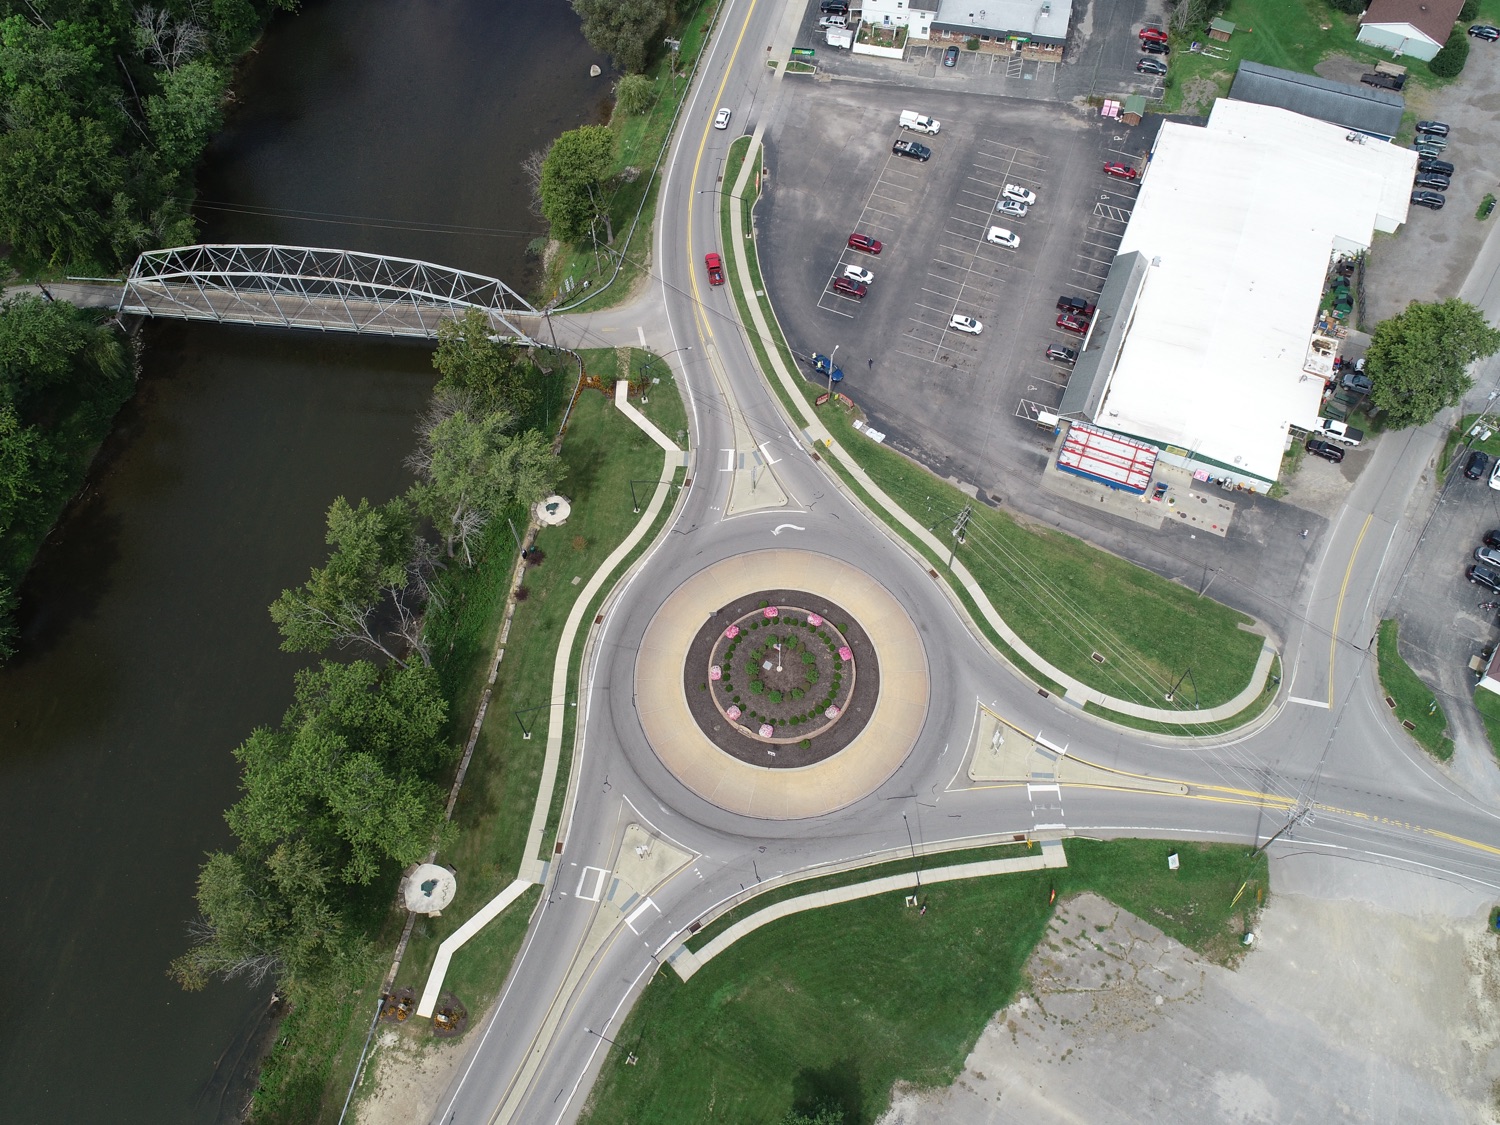 Route 6-19 (Main Street) and Route 198 (South Street)<br><a href="https://filesource.amperwave.net/commonwealthofpa/photo/22209_dot_roundabout_photo_5.jpg" target="_blank">⇣ Download Photo</a>